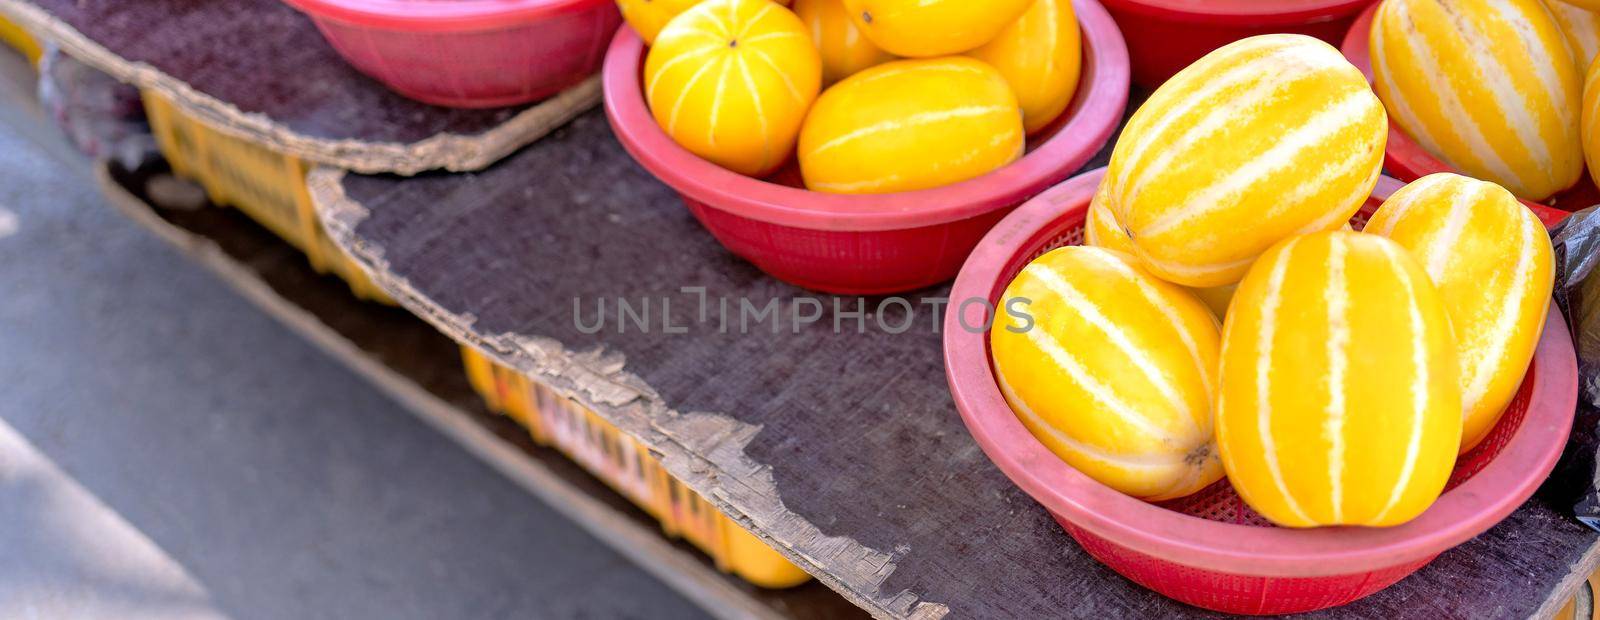 Delicious korean stripe yellow melon fruit food in red plastic basket at tradition market afternoon, Seoul, South Korea, harvest concept, close up. by ROMIXIMAGE